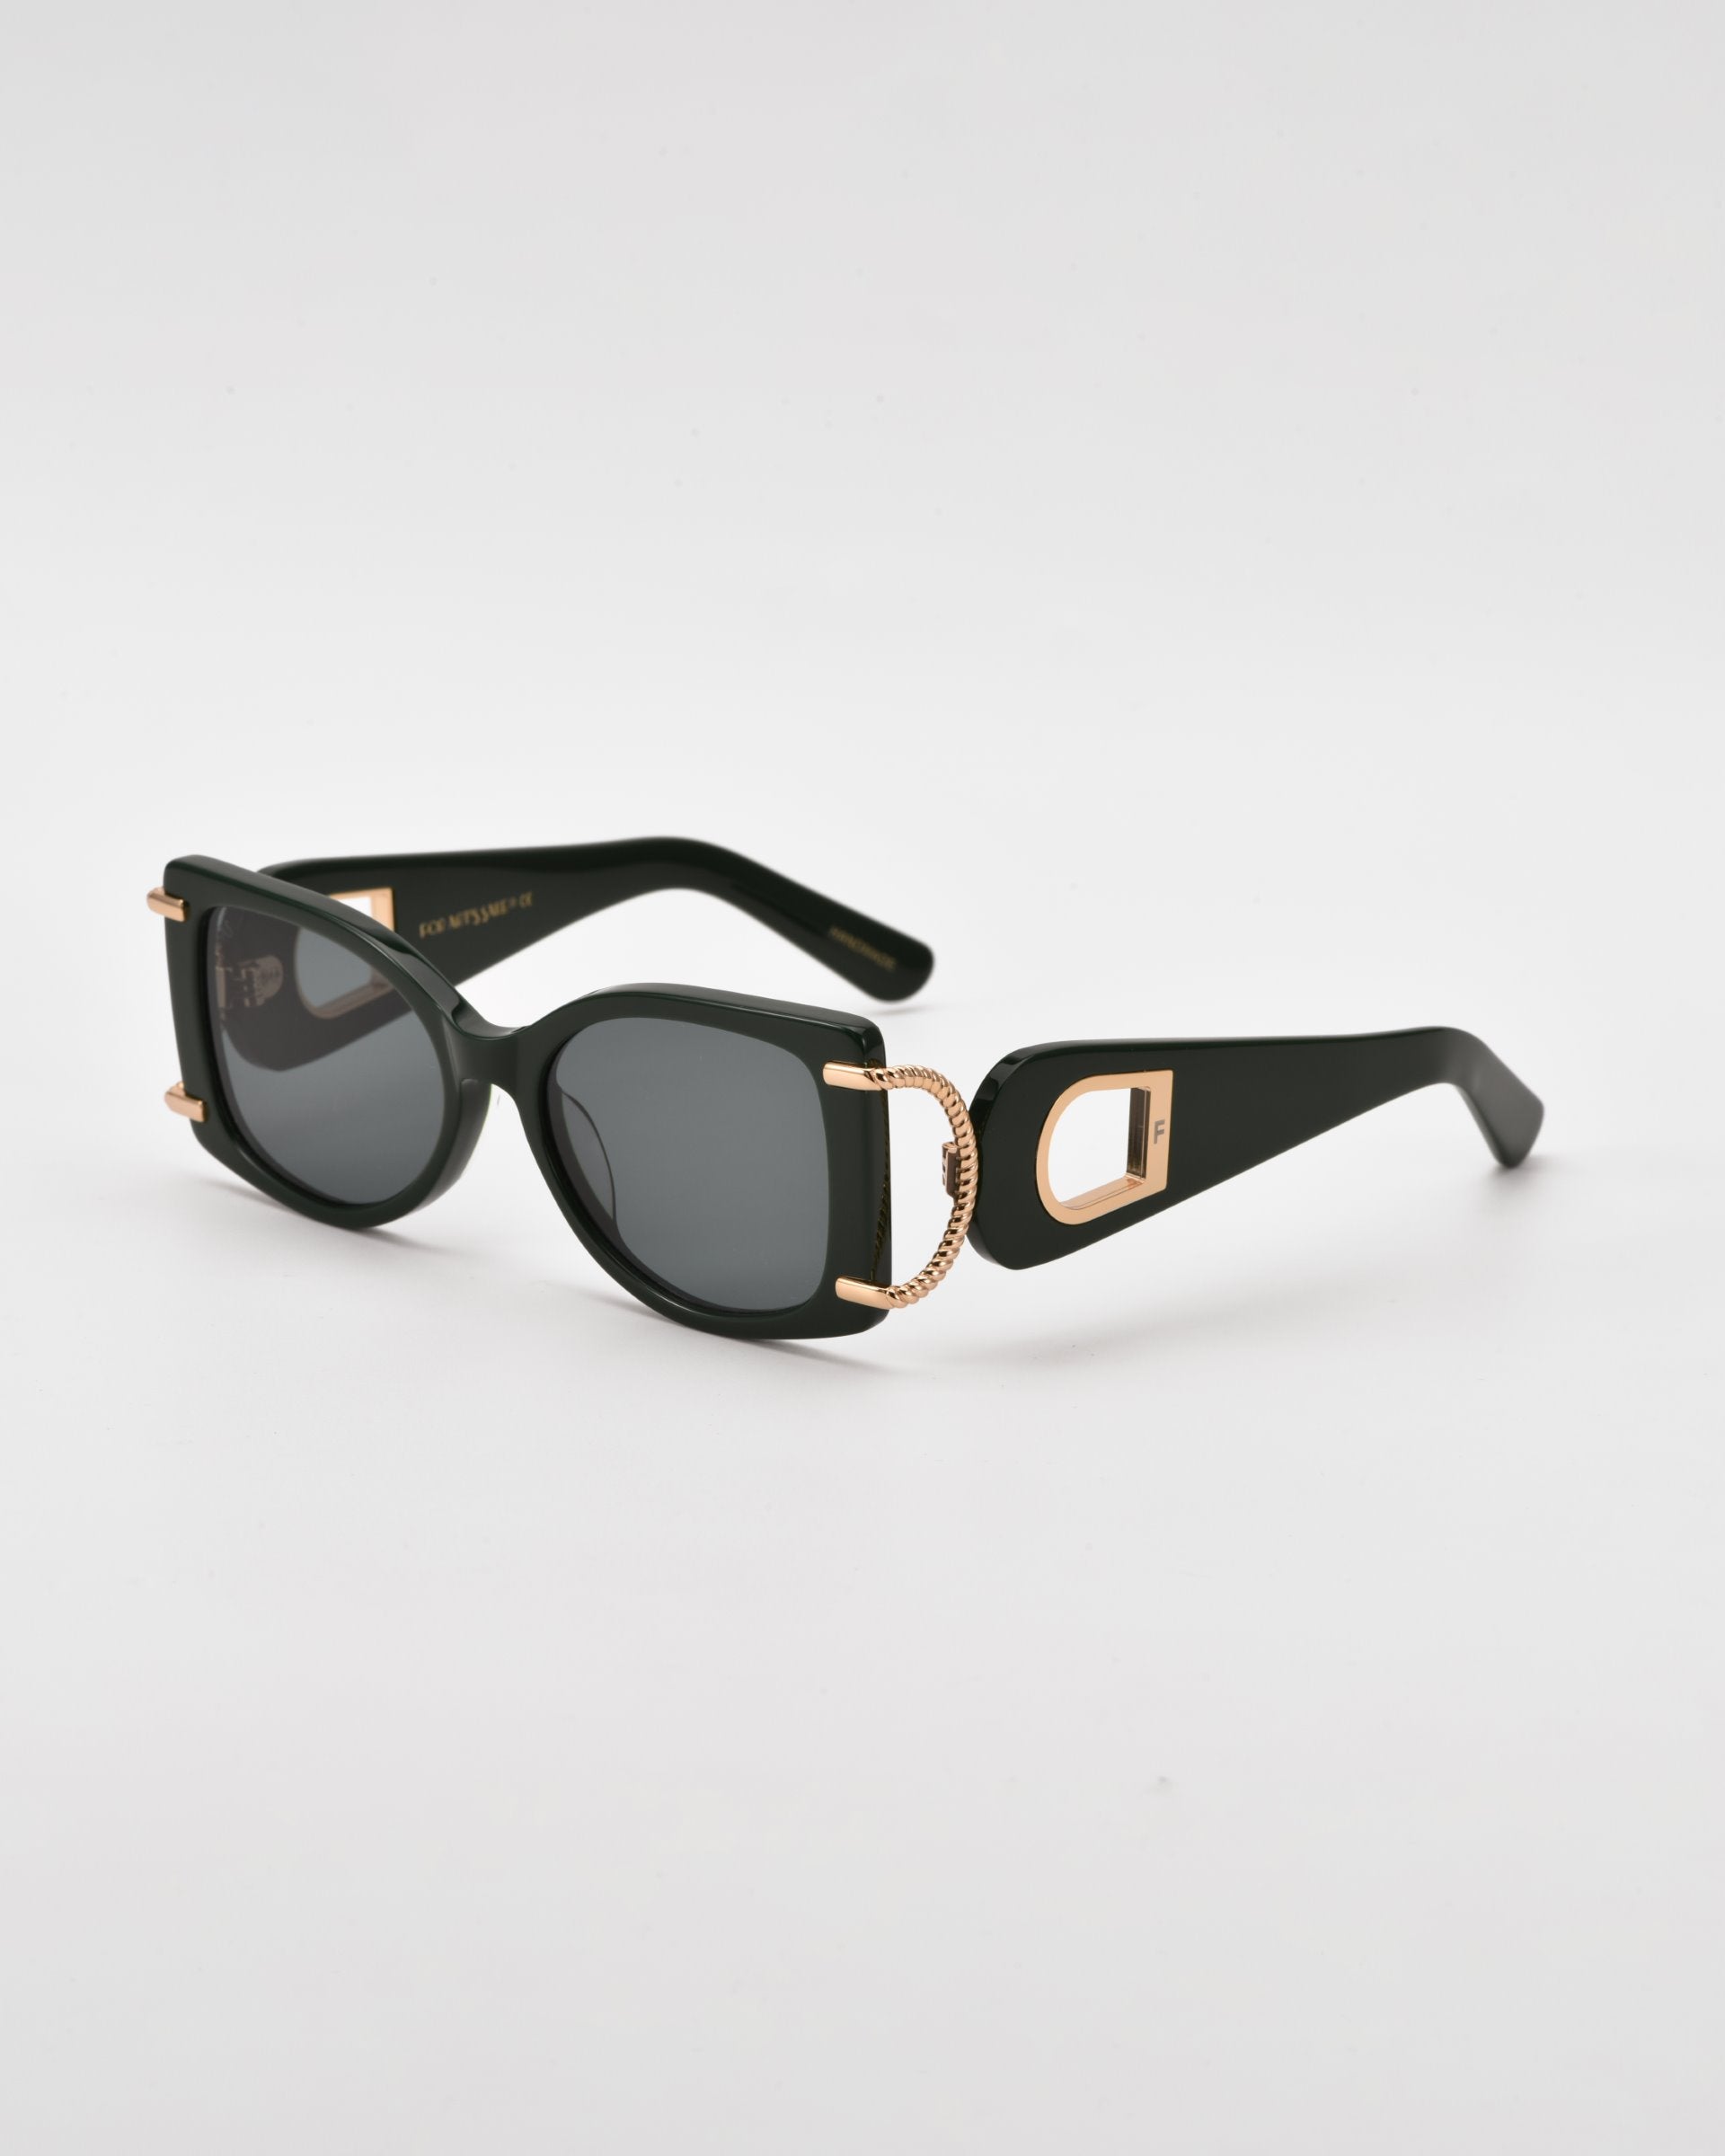 Black rectangular acetate sunglasses with dark lenses featuring 18-karat gold-plated accents on the temples that form a stylish &quot;D&quot; shape. The design includes curved earpieces and offers 100% UVA &amp; UVB protection, presenting a sleek, modern appearance against a plain white background. These are the Sculpture sunglasses by For Art&#39;s Sake®.